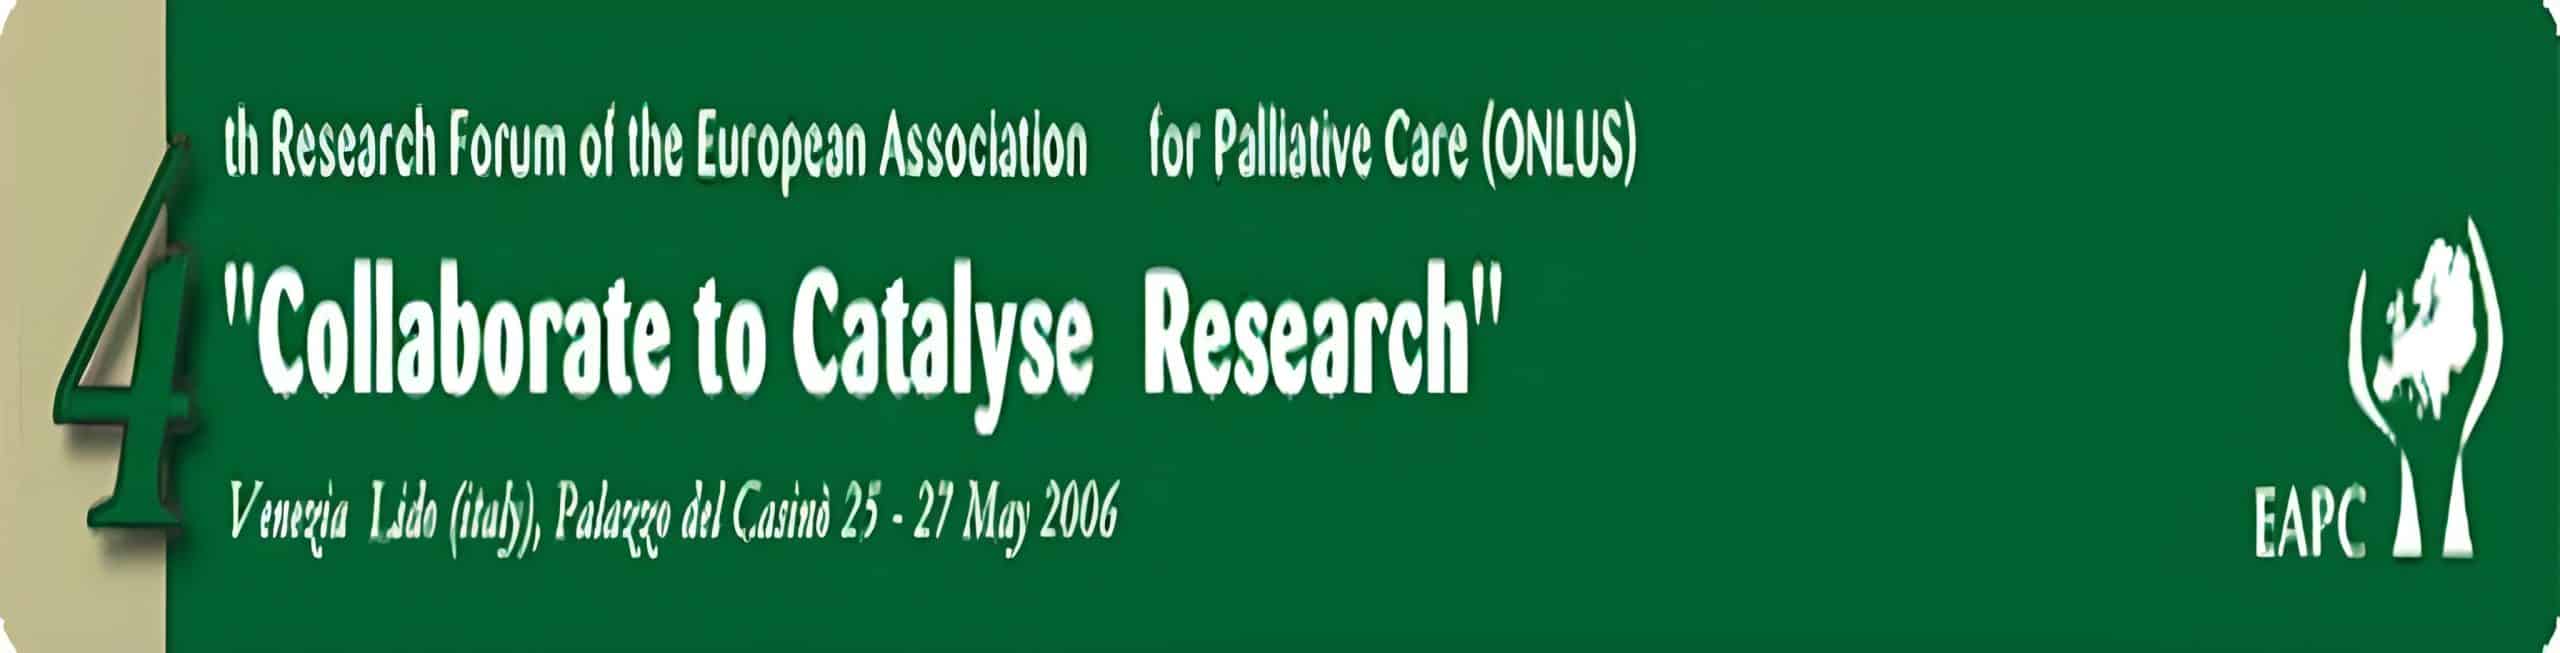 banner 4th research forum of the EAPC "collaborate to caralyse research"